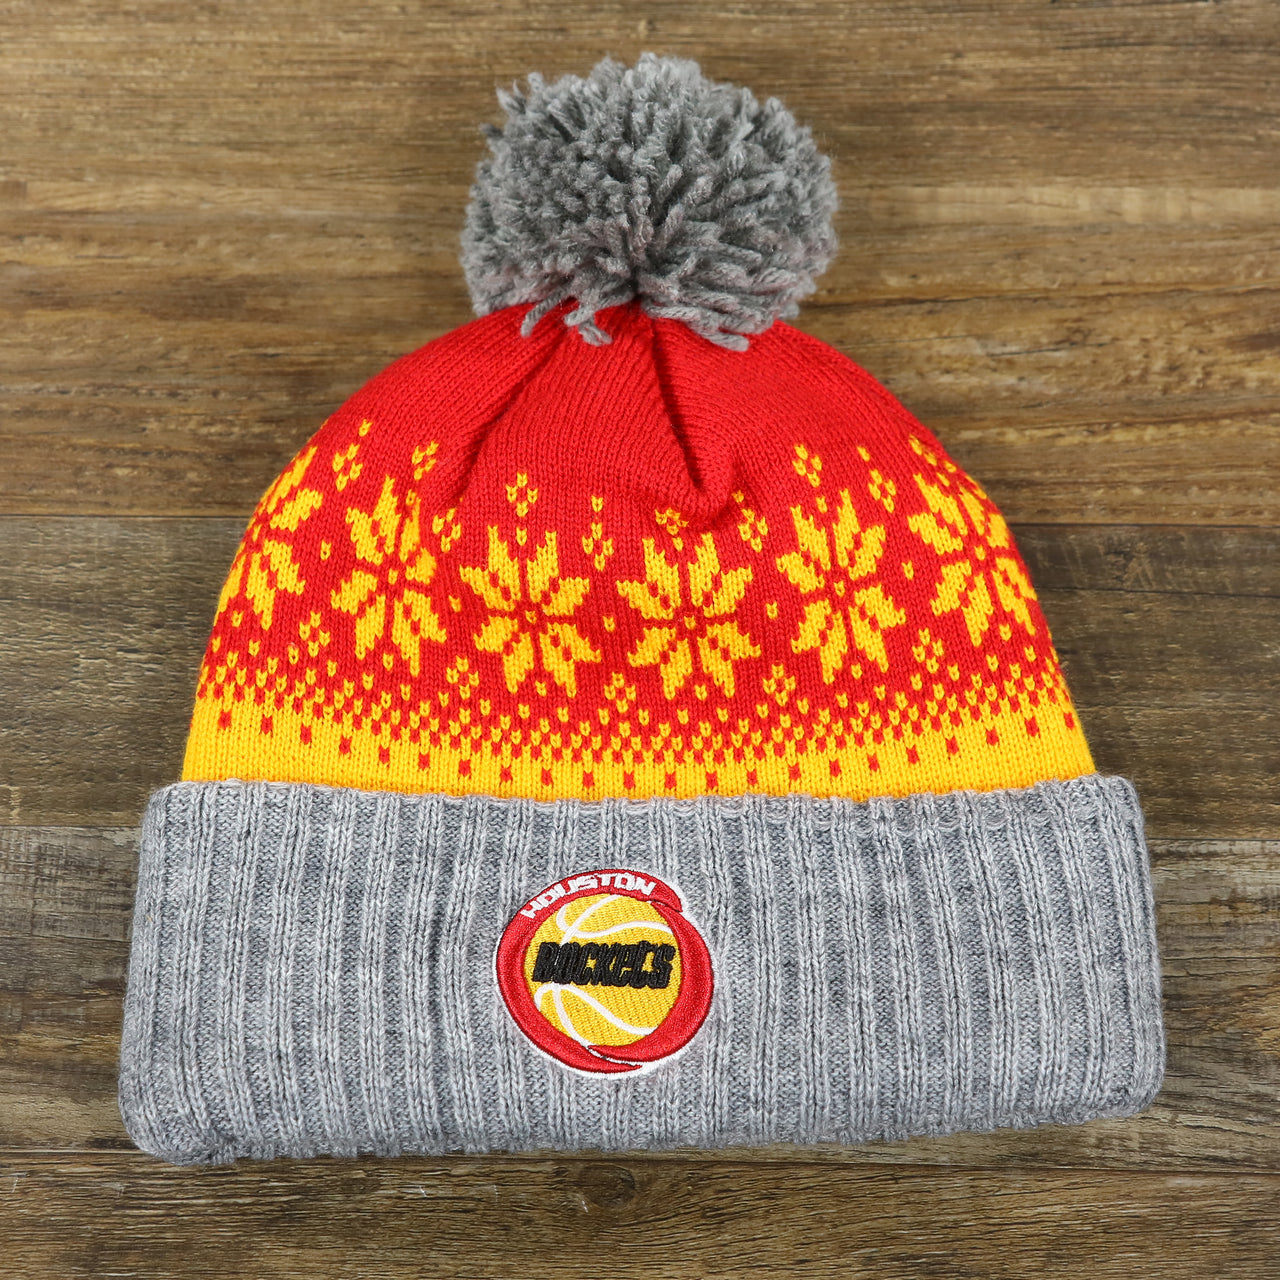 The front of the Retro Houston Rockets Arctic Snowflake Ugly Sweater Pattern Cuffed Beanie With Pom Pom | Yellow, Maroon, and Gray Winter Beanie